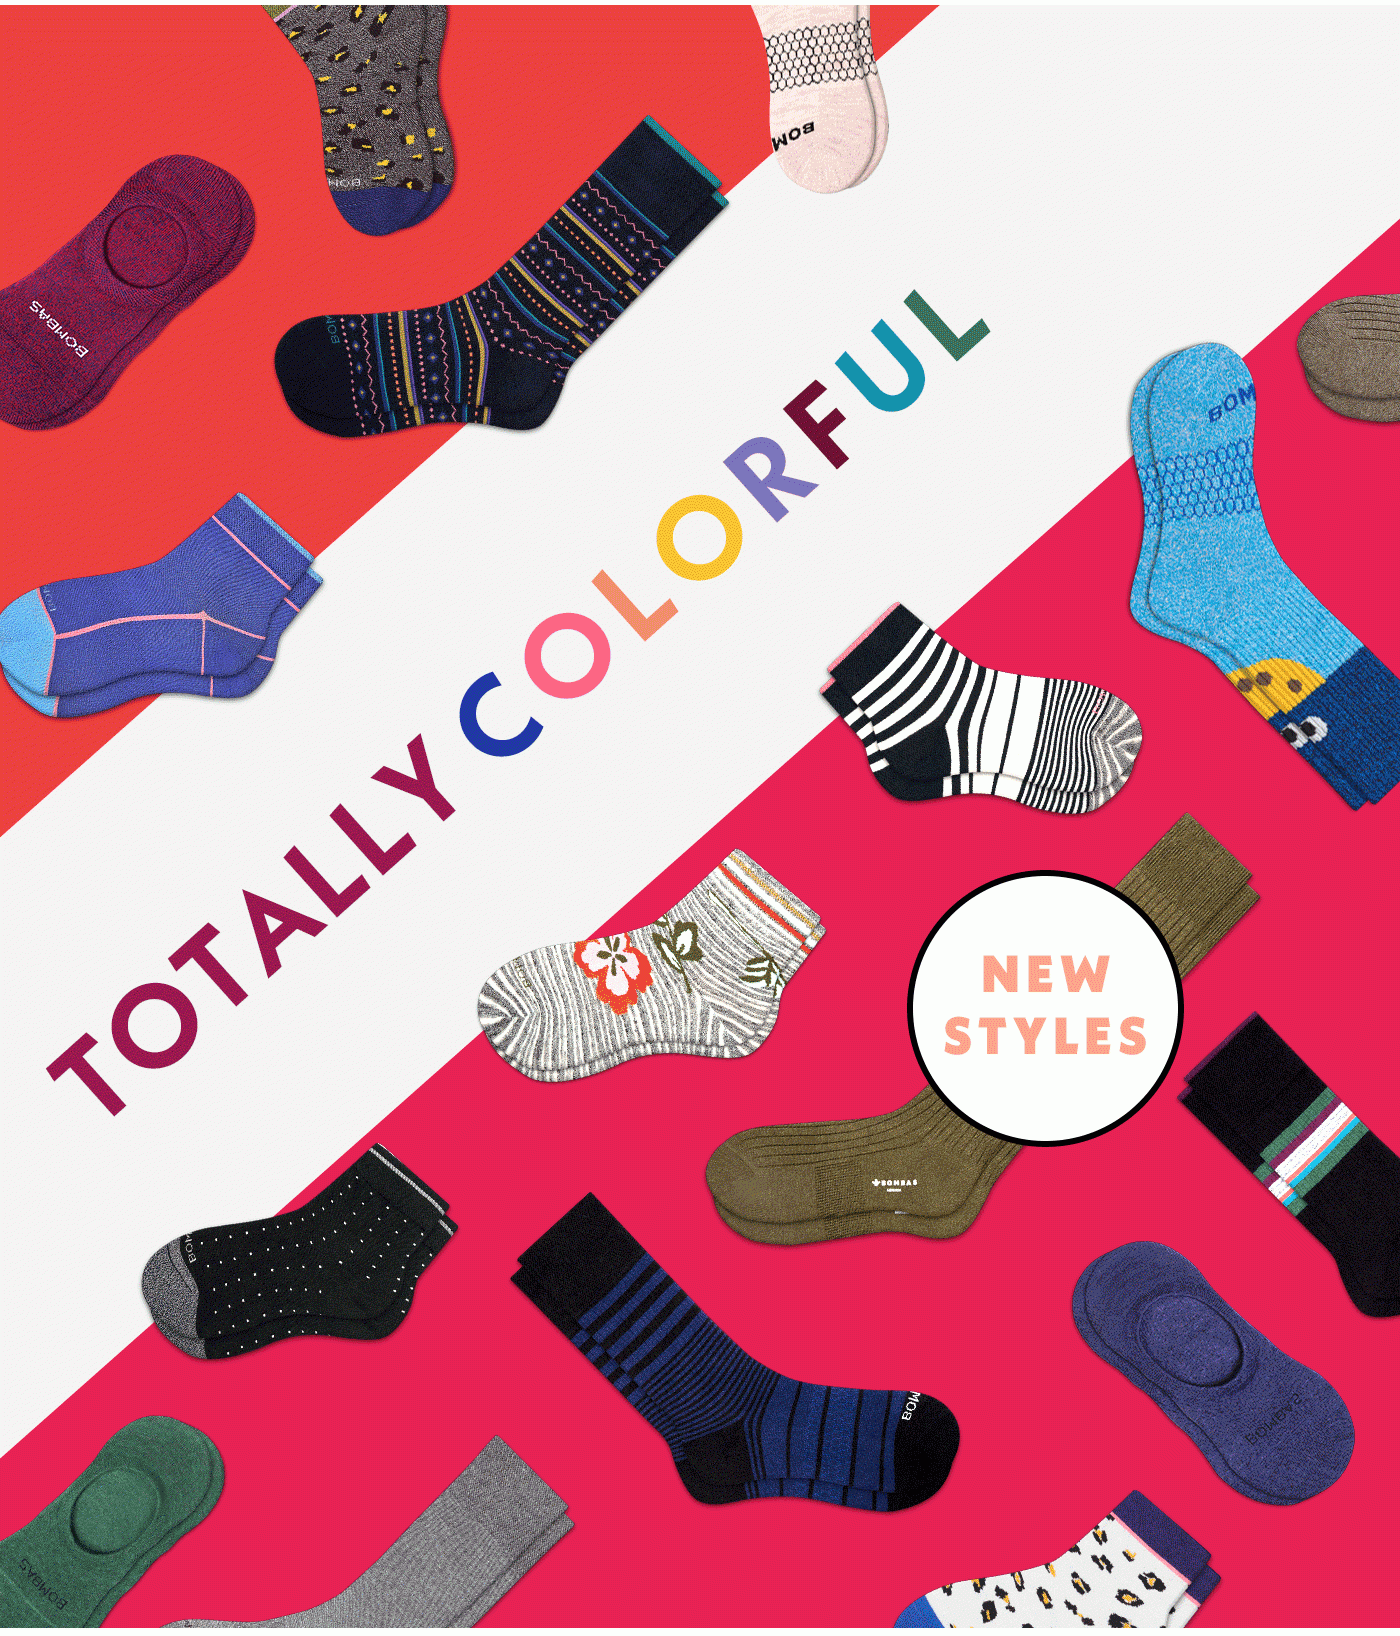 Totally comfortable. Totally colorful. New styles to get you out of your comfort zone. Cozy comfort features to bring you right back in. It's a roller coaster of emotion you'll never want to get off.